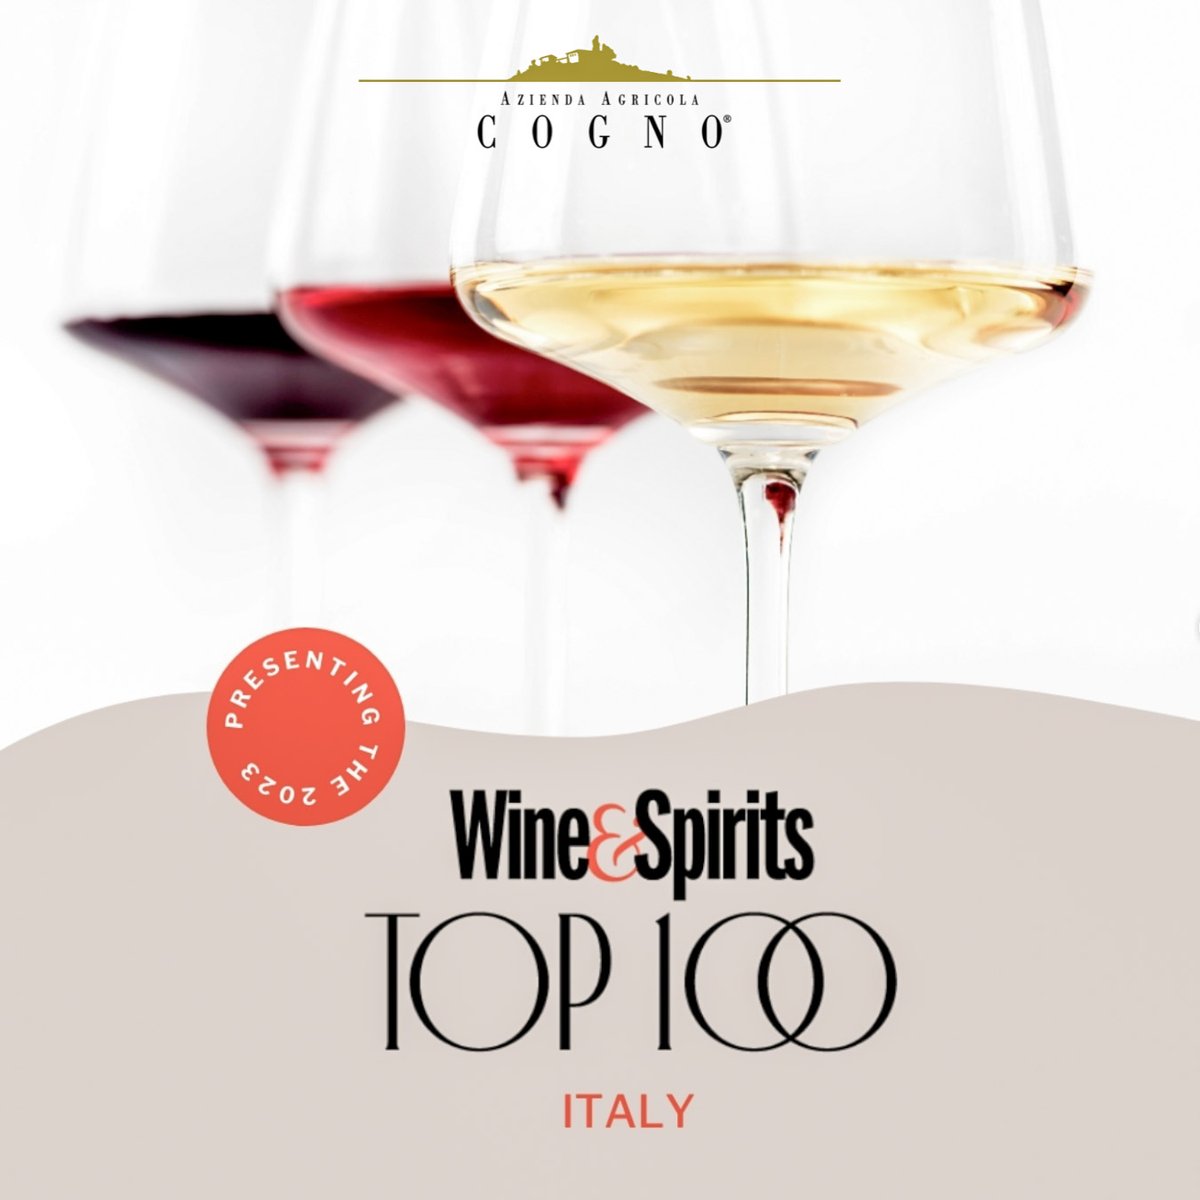 We are pleased to announce that Elvio Cogno is again one of the Top 100 wineries of 2023 according to @WineandSpirits. Thank you so much!

We will be happy to take part in the traditional tasting in San Francisco next fall and celebrate the 20th Anniversary of the event!